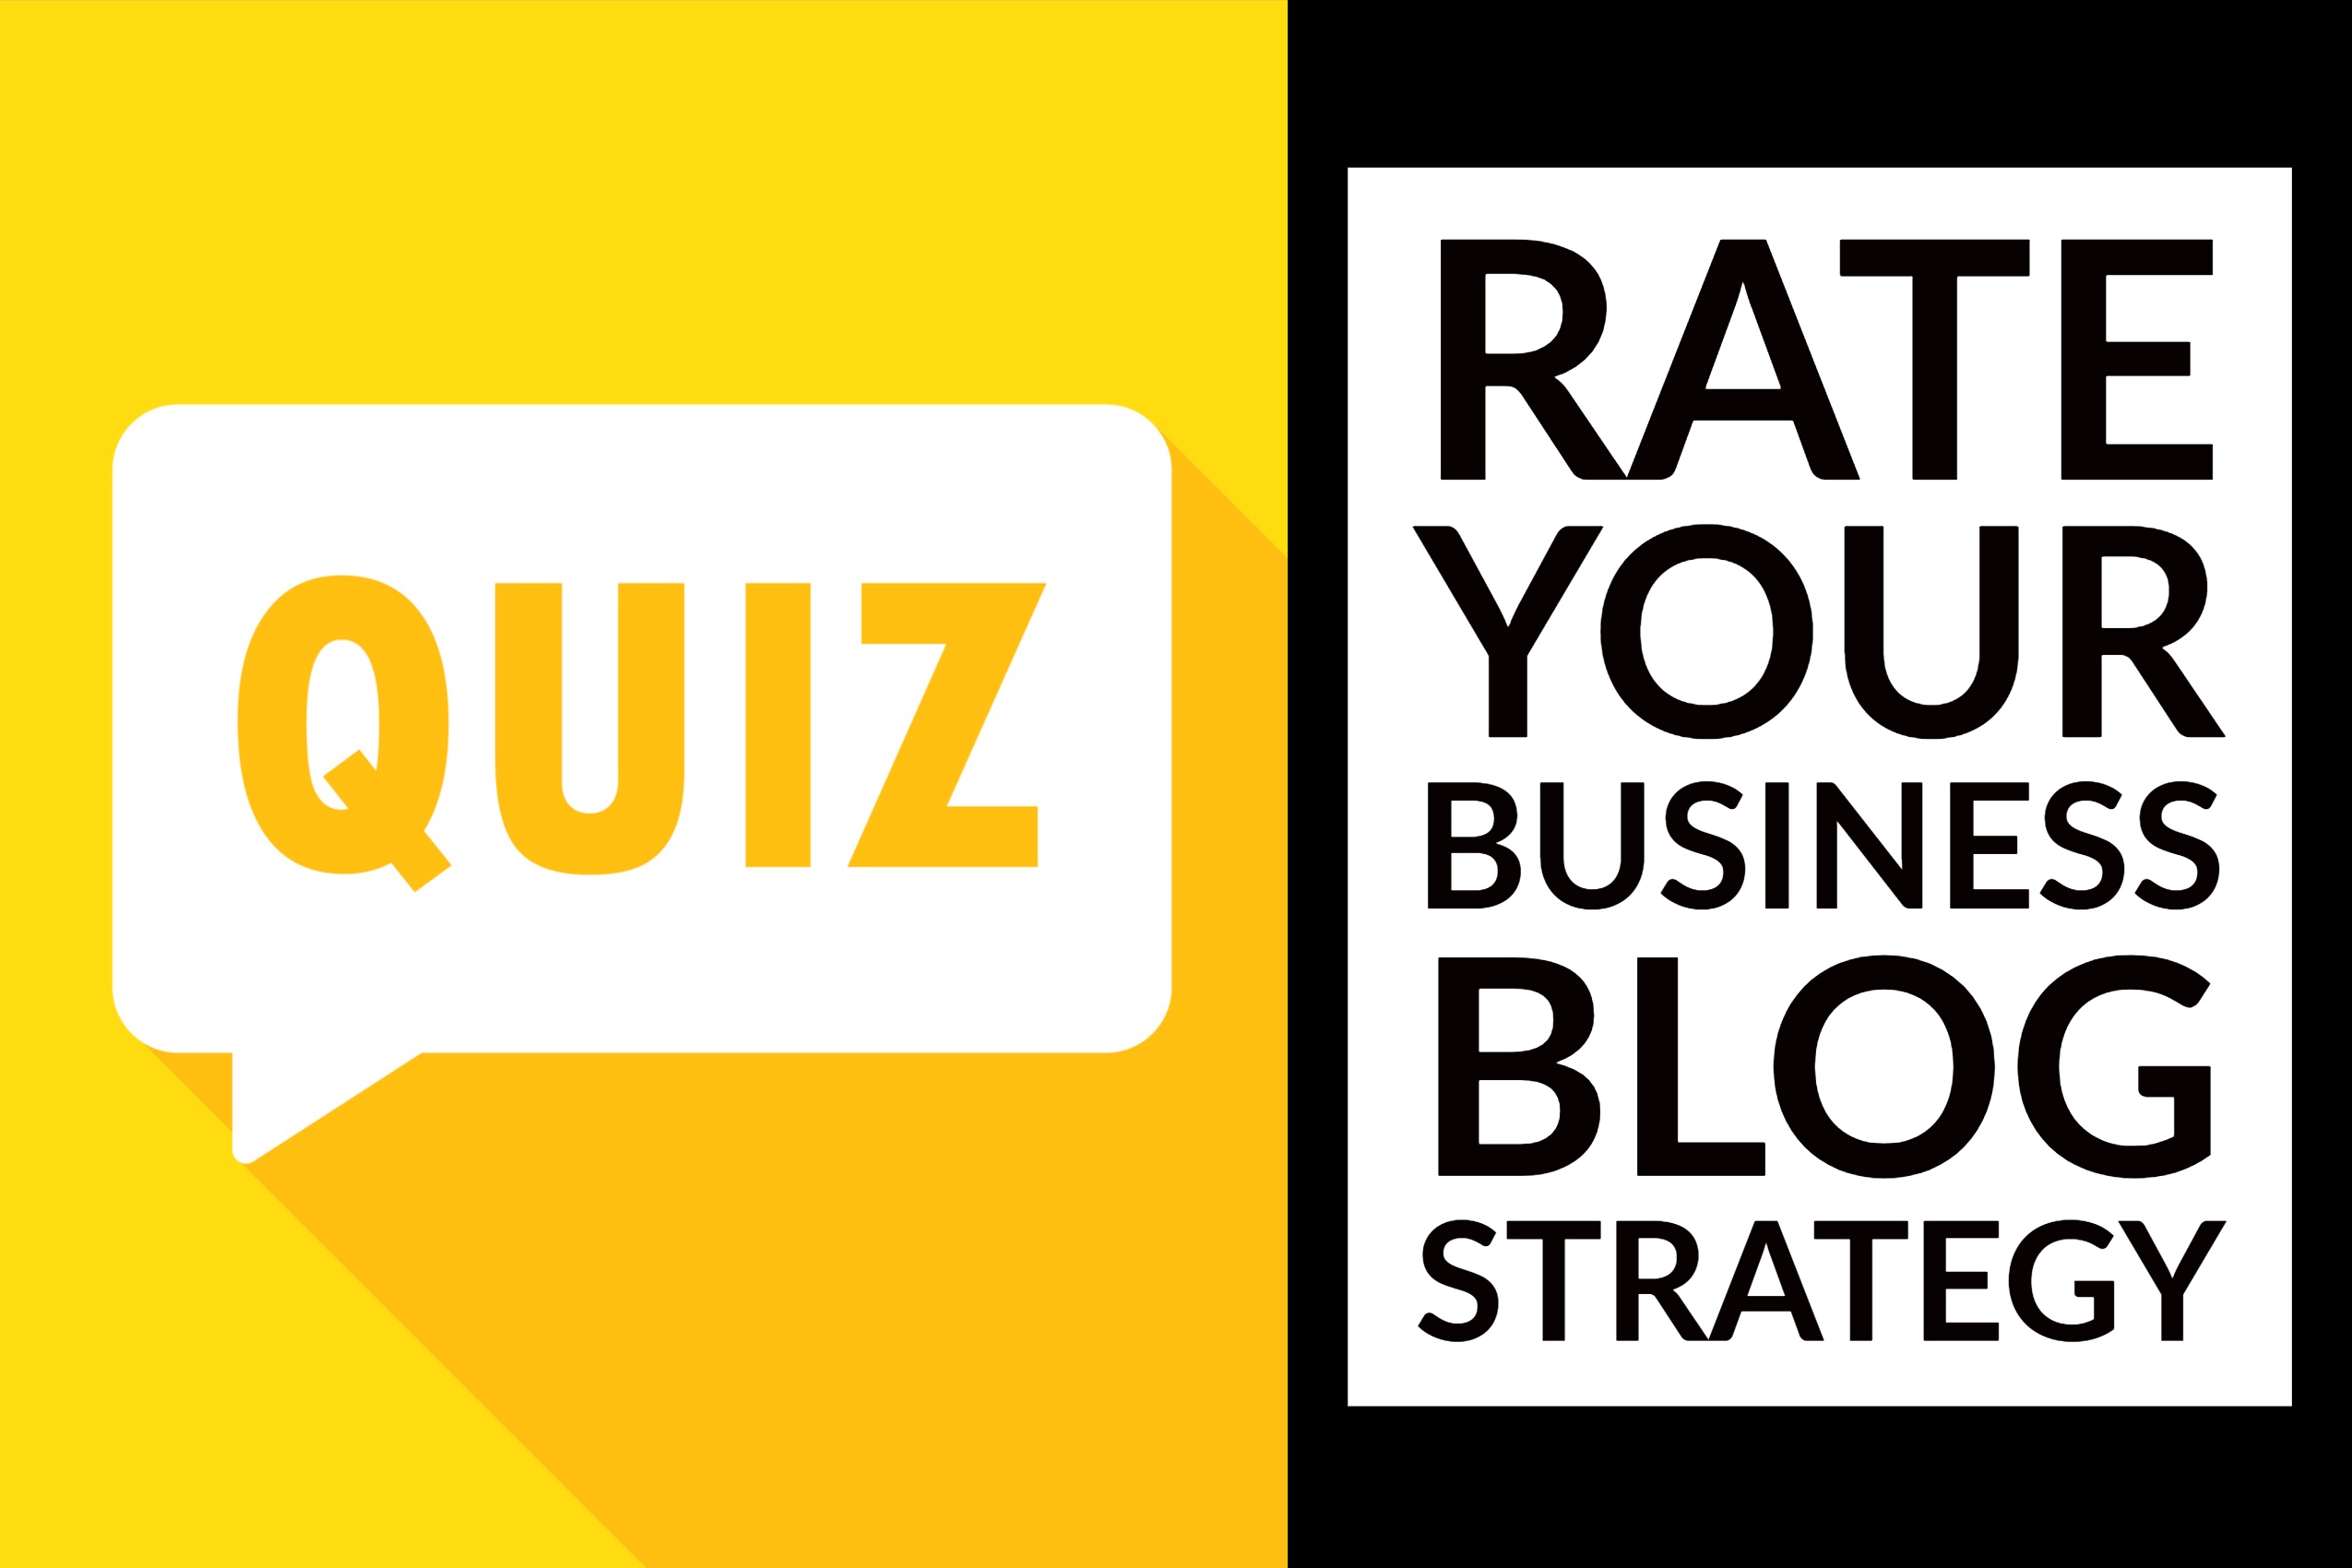 Rate Your Business Blog Strategy (quiz)